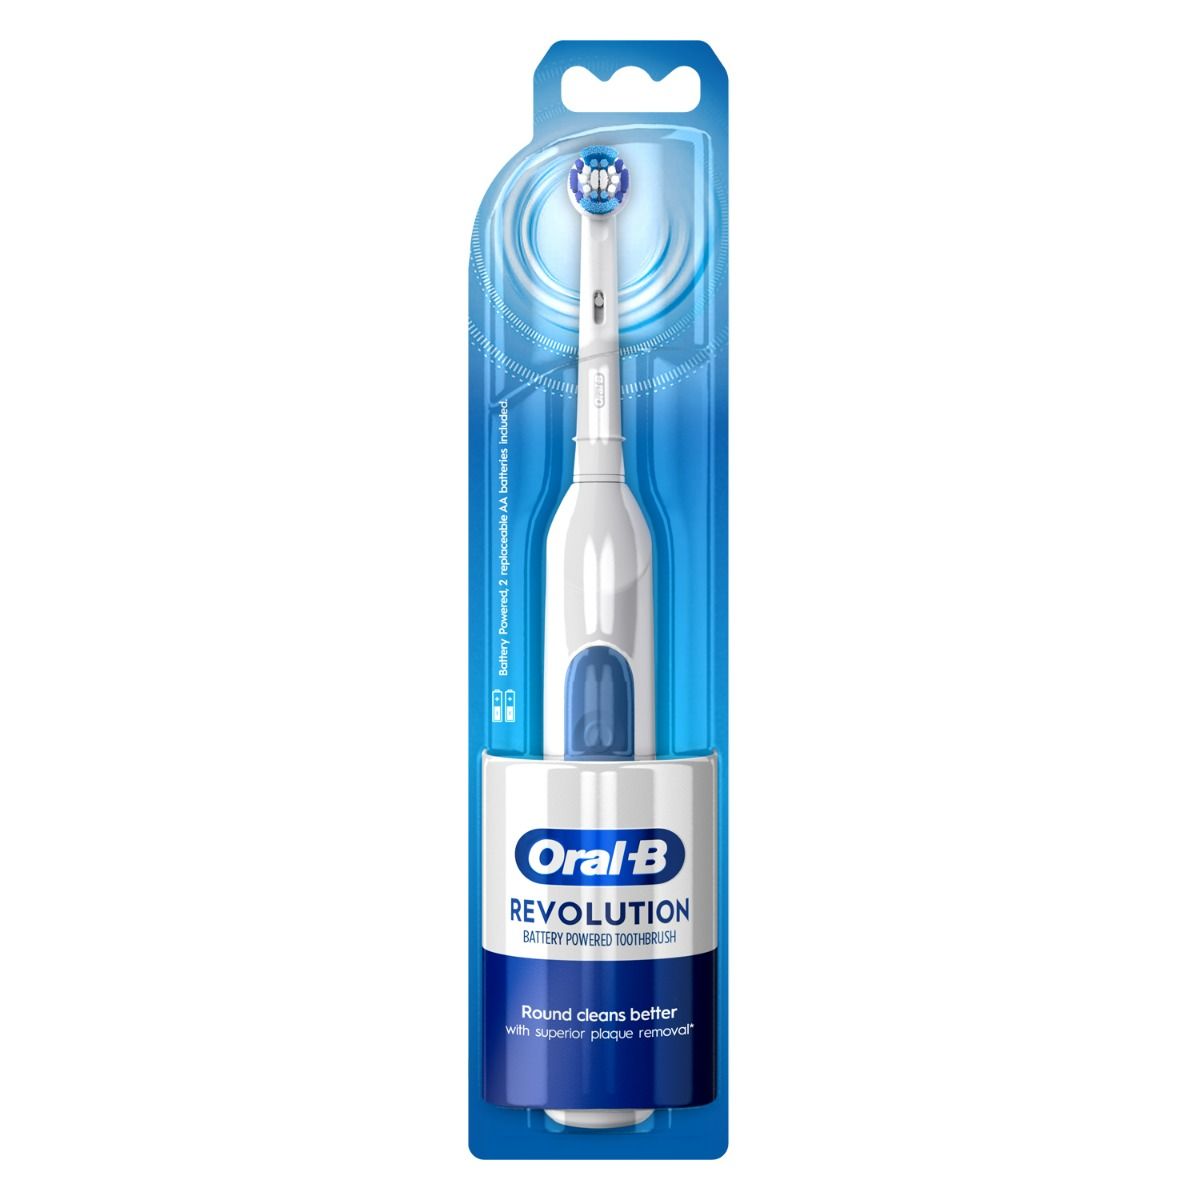 Buy Oral-B Revolution Battery Powered Toothbrush, 1 Count Online